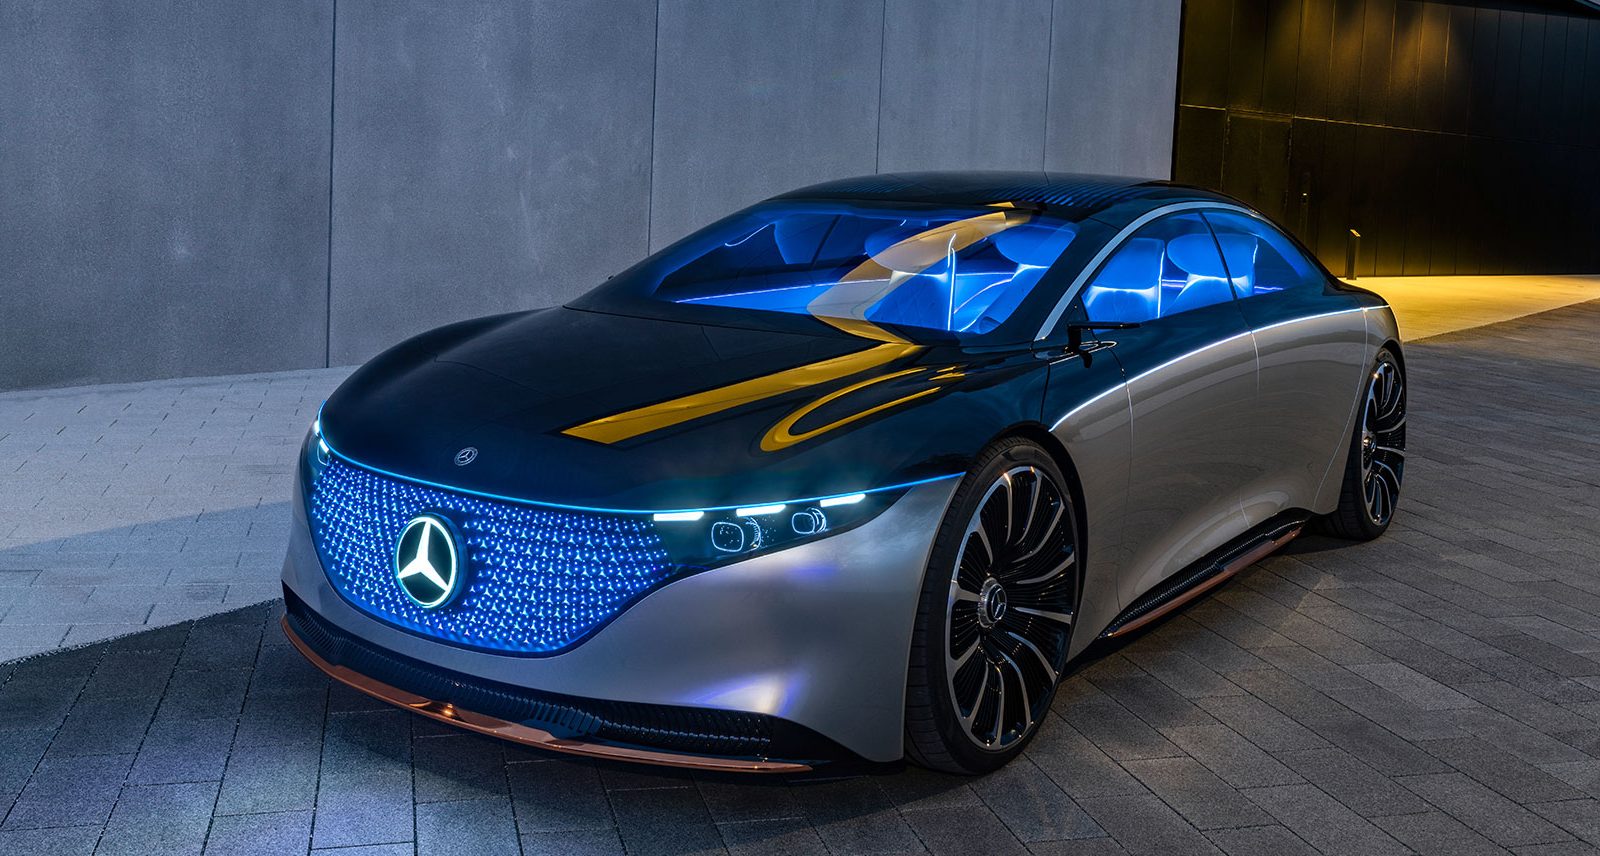 The Mercedes-Benz Vision EQS Concept Makes This Whole Sustainability Thing Look Really Good